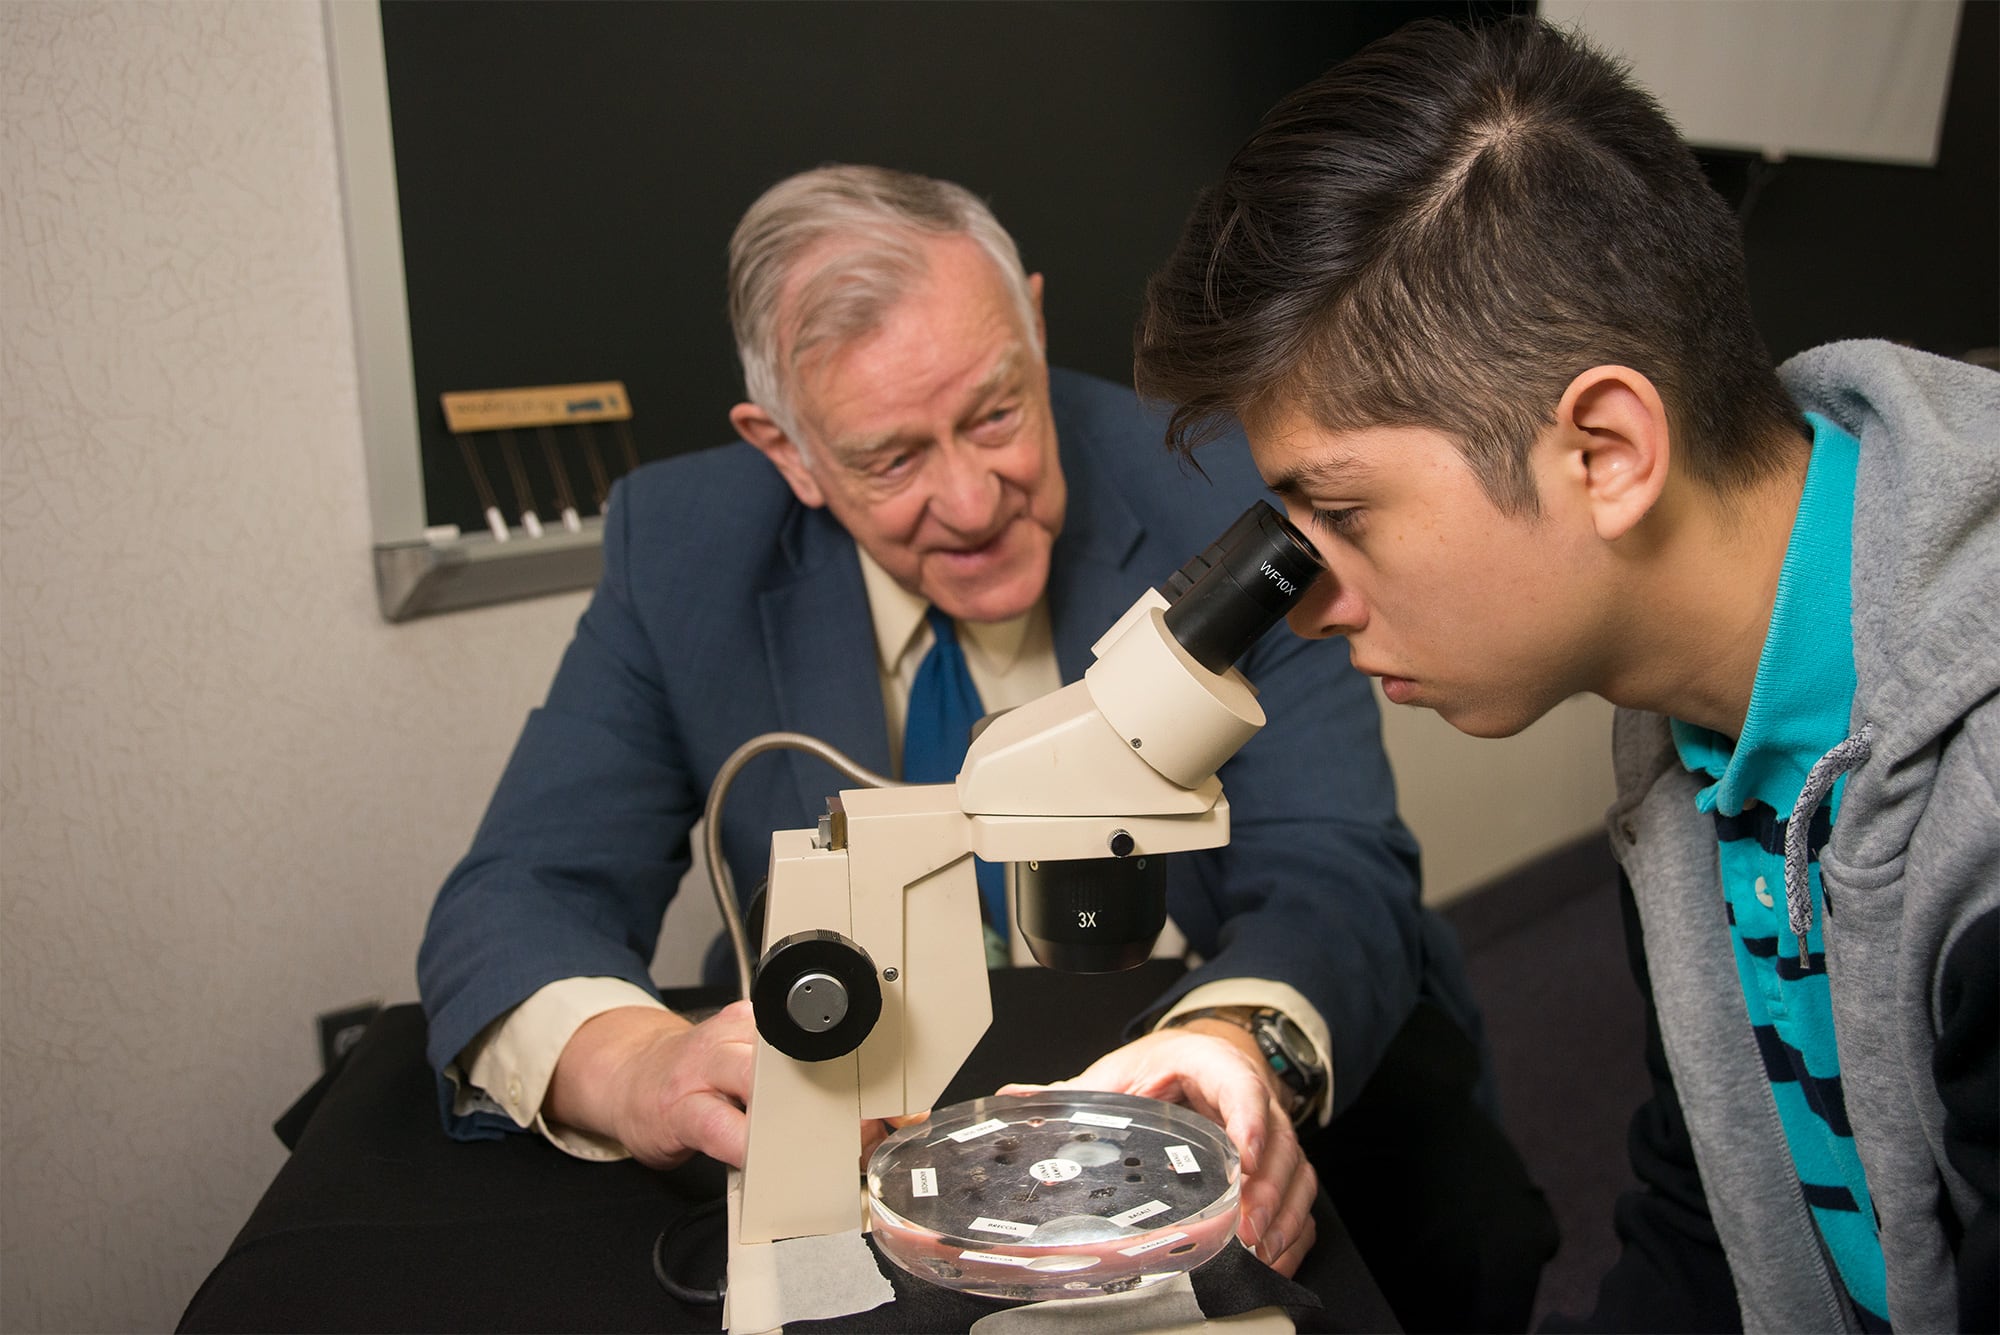 student looking in microscope.